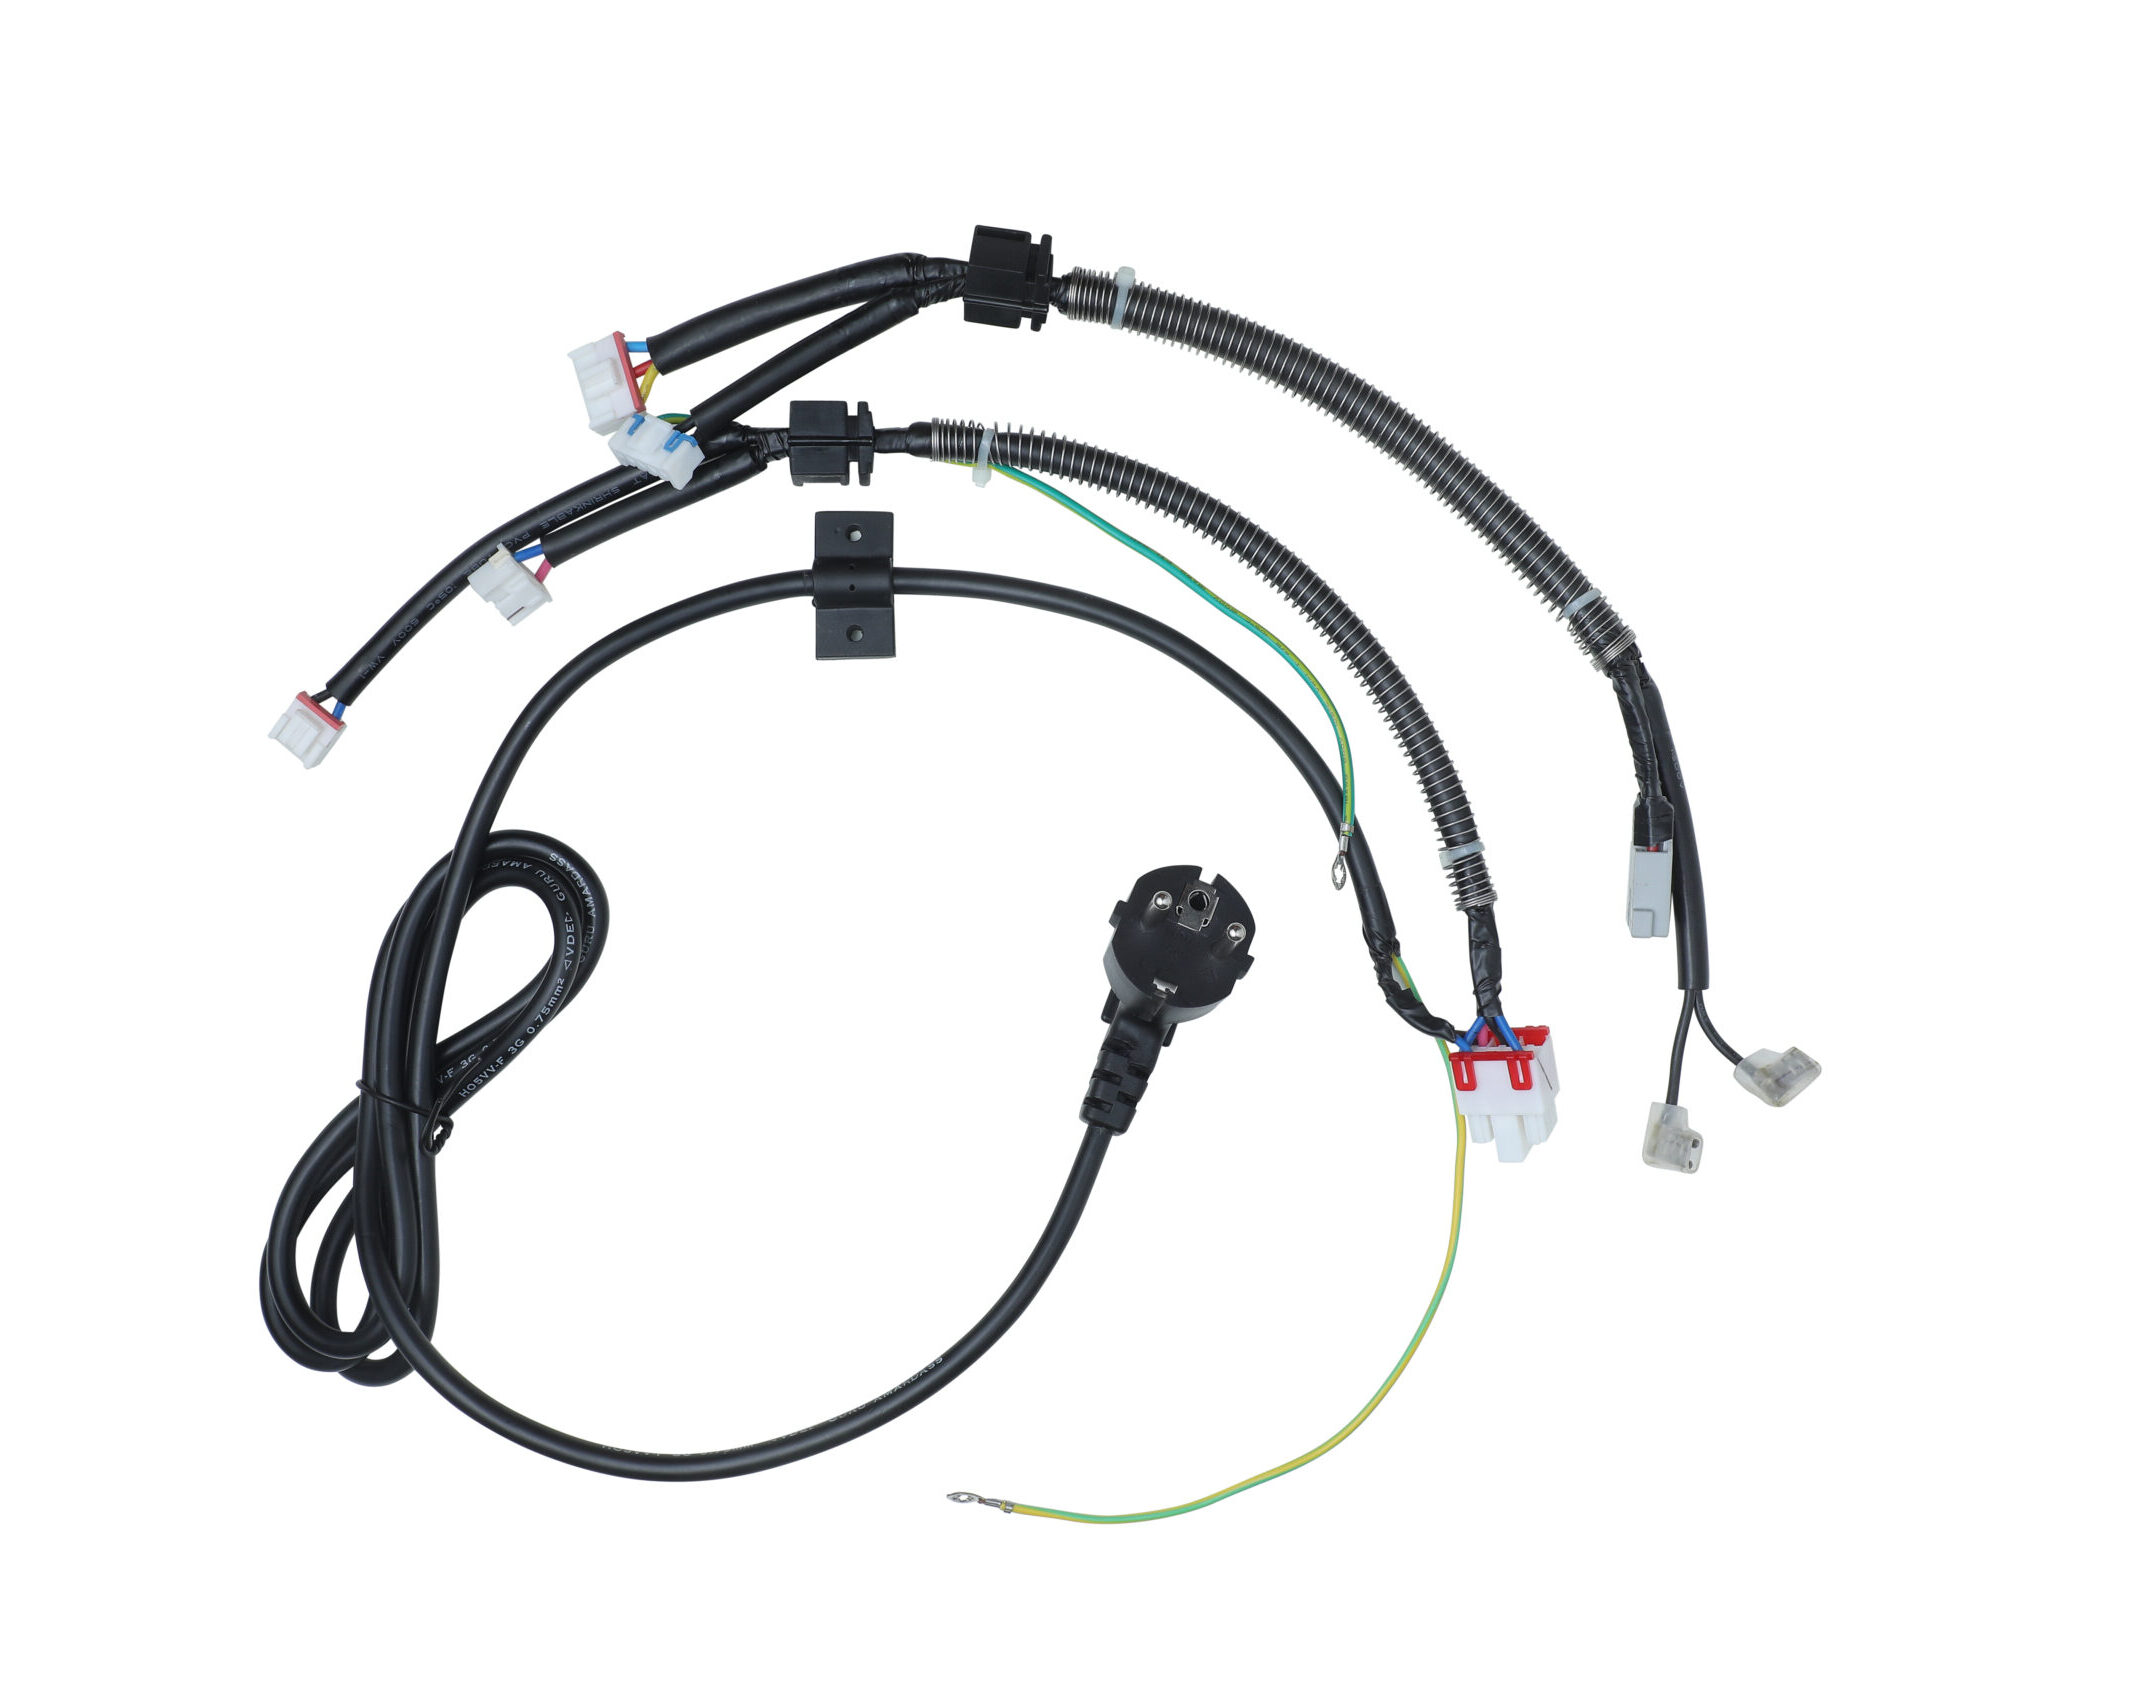 Custom Cable Assembly - Wiring Harness Company in India